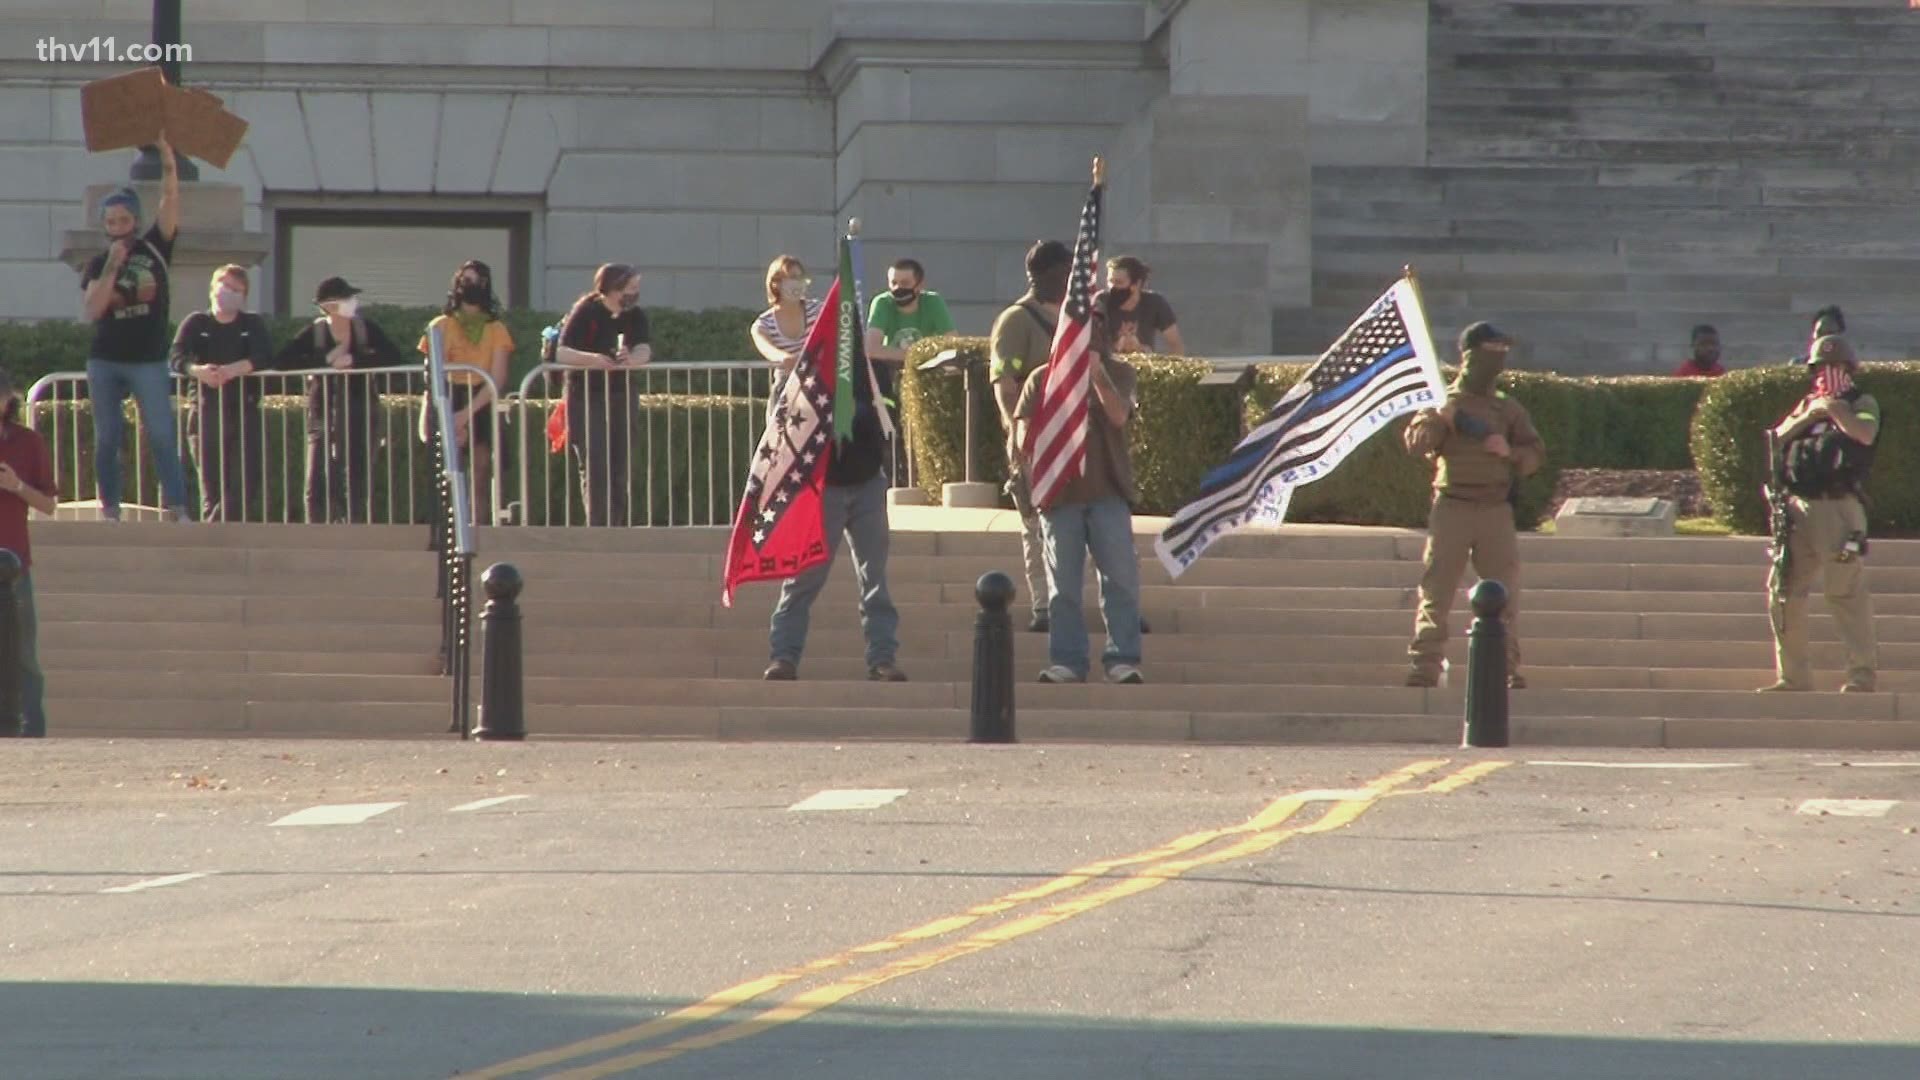 The protesters gathered outside the Capitol building on Saturday afternoon as police monitored the situation.